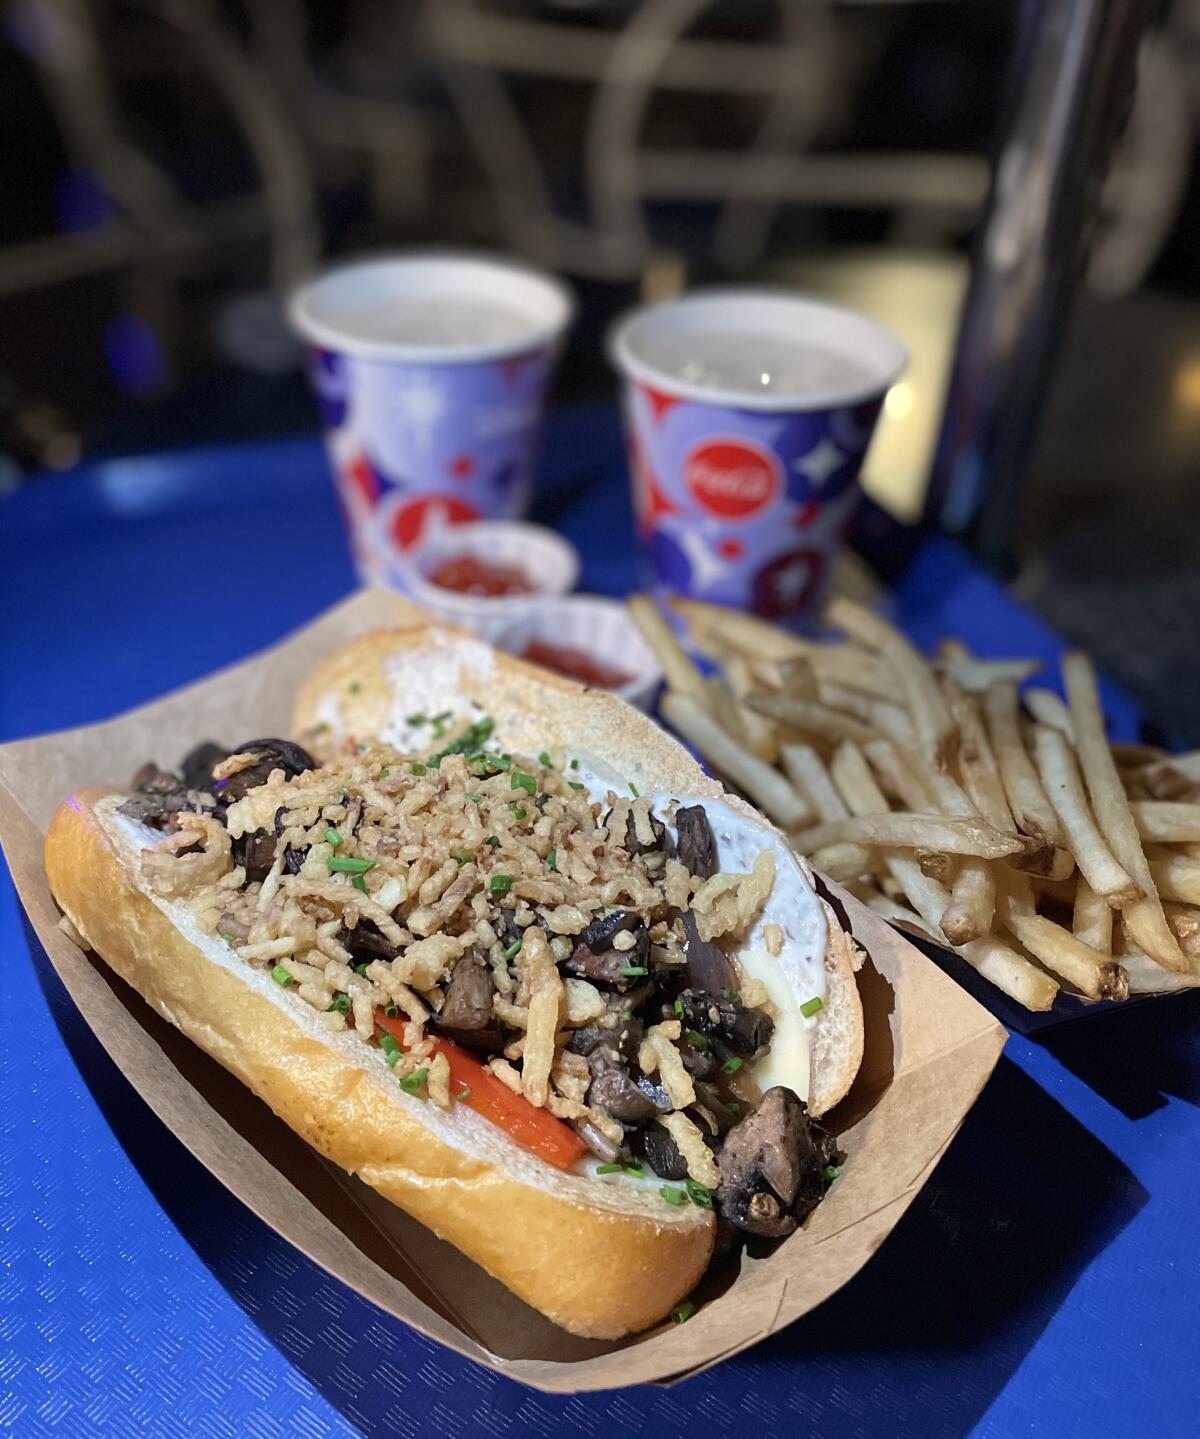 The Mushroom Philly sandwich at Galactic Grill at Disneyland Park.